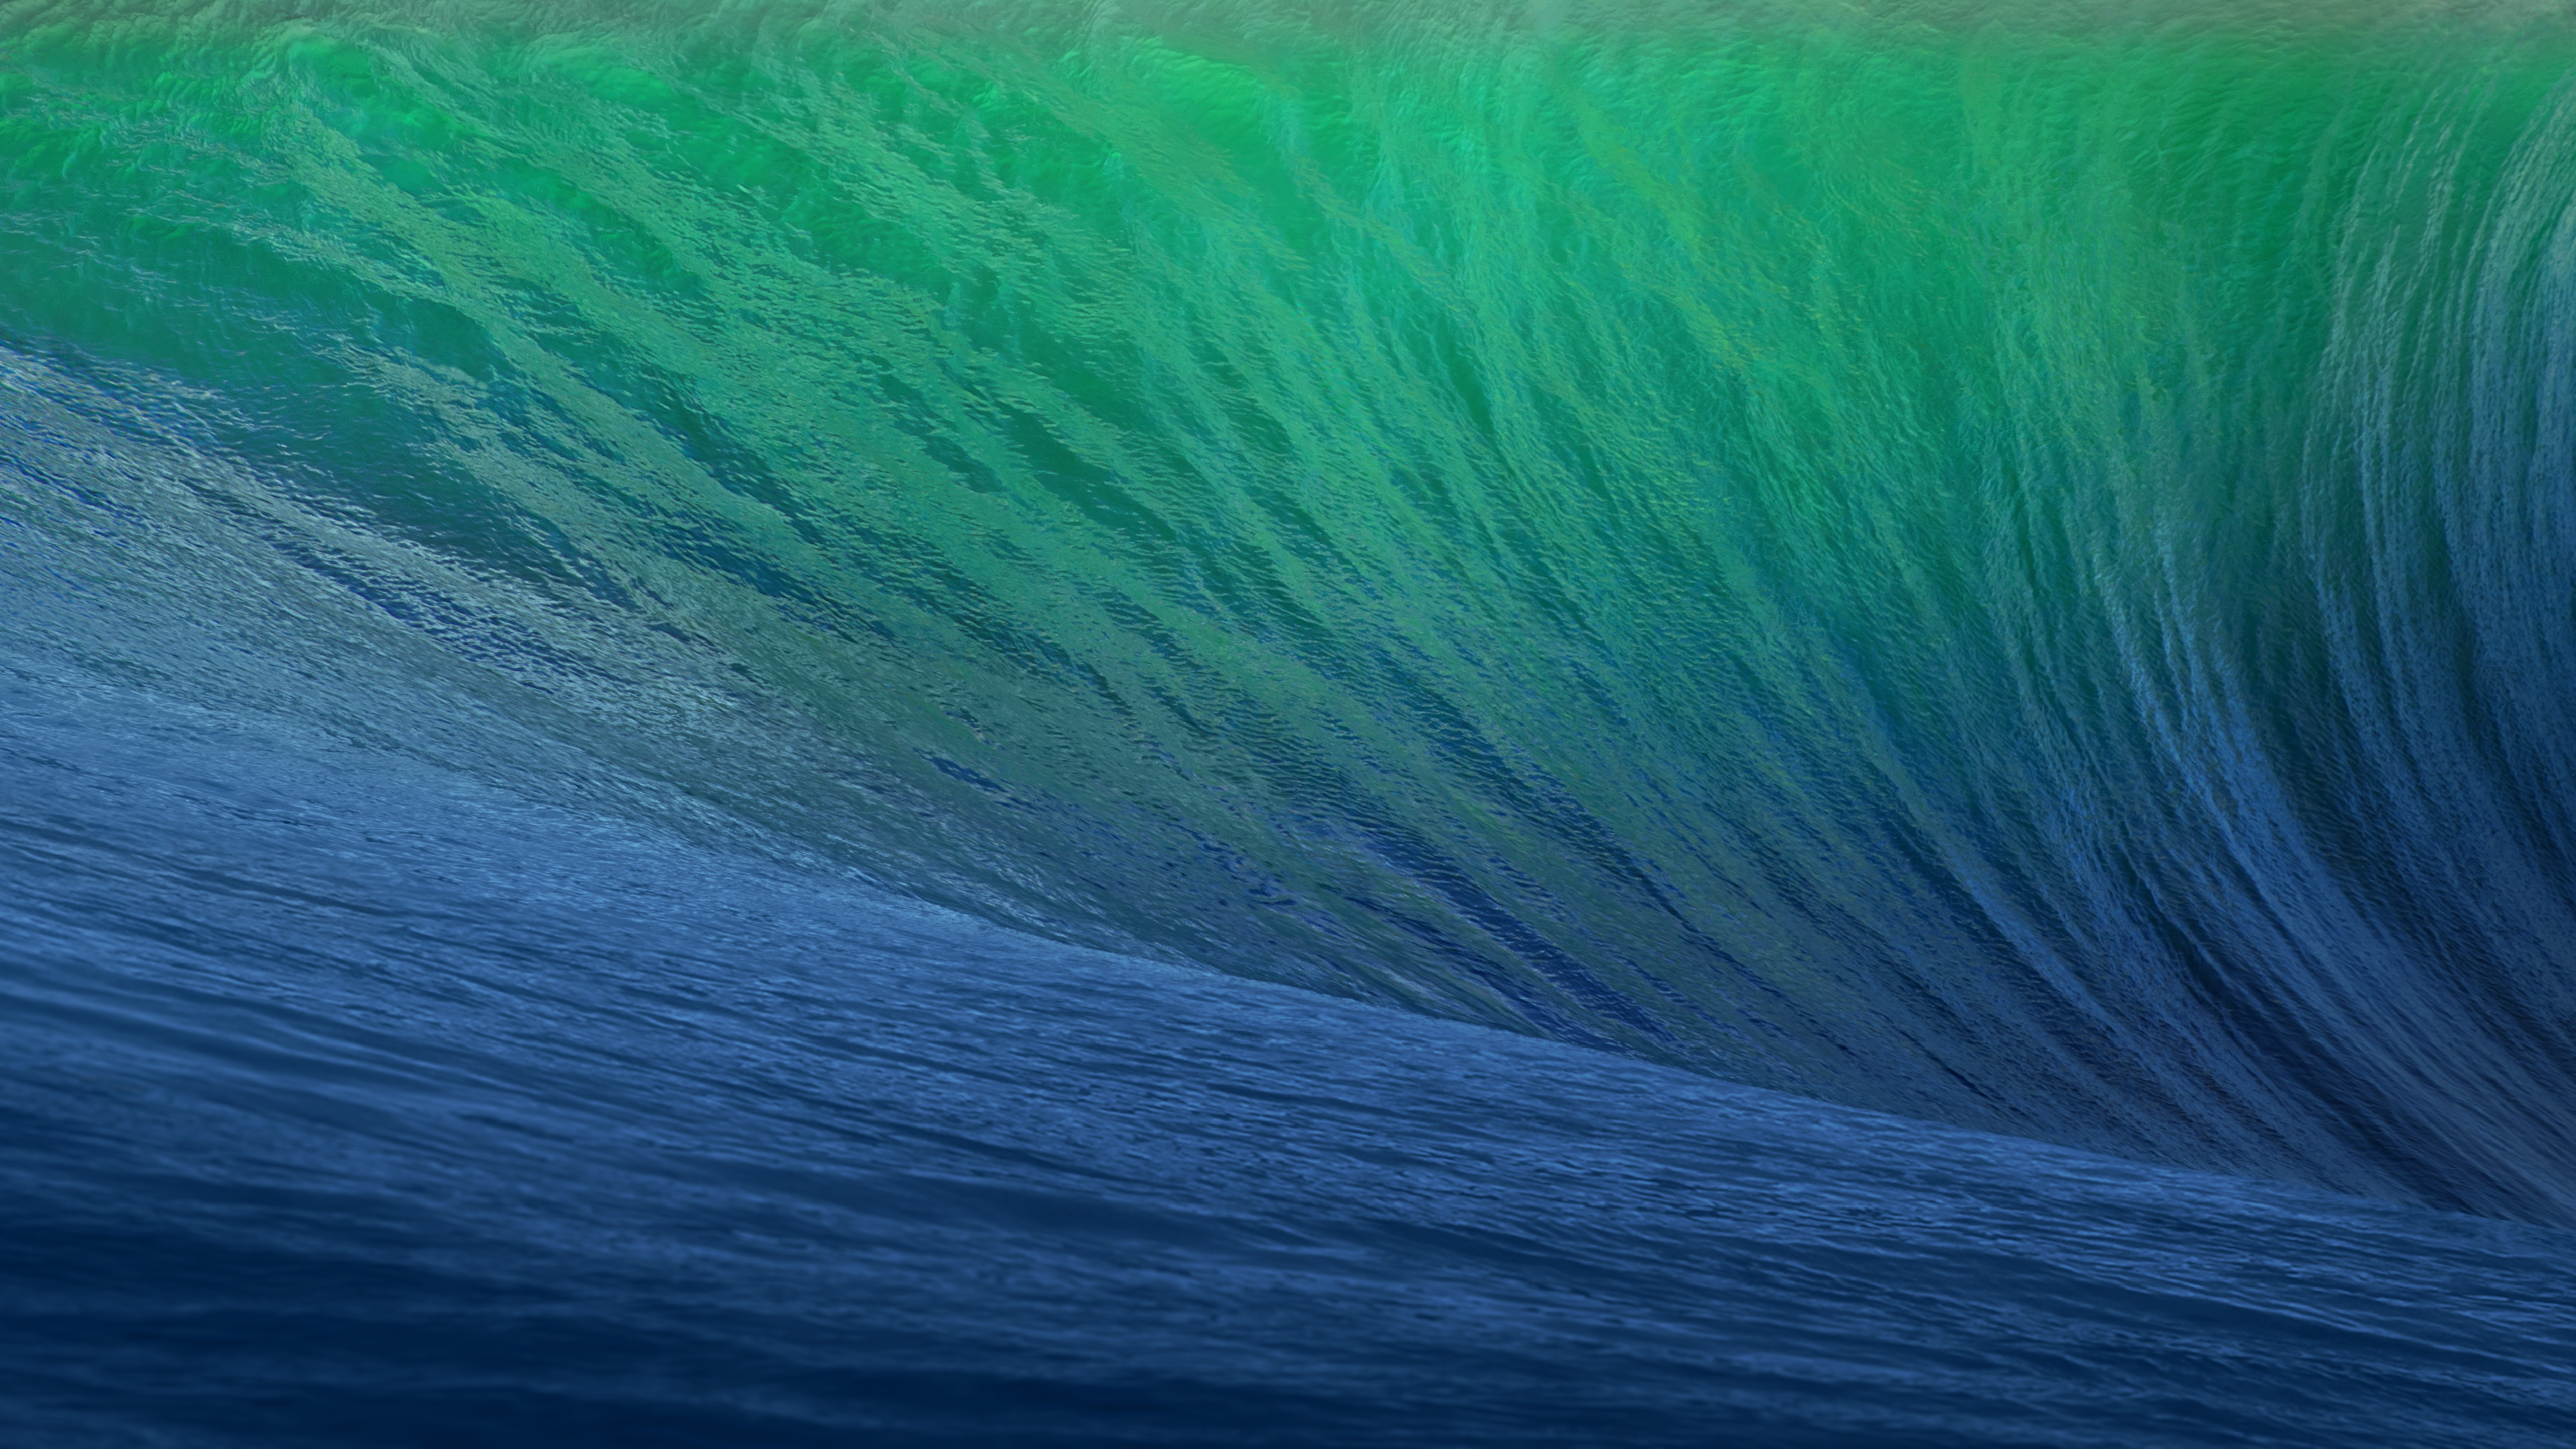 Want a taste of OS X 109 Mavericks before it launches later this year 5120x2880